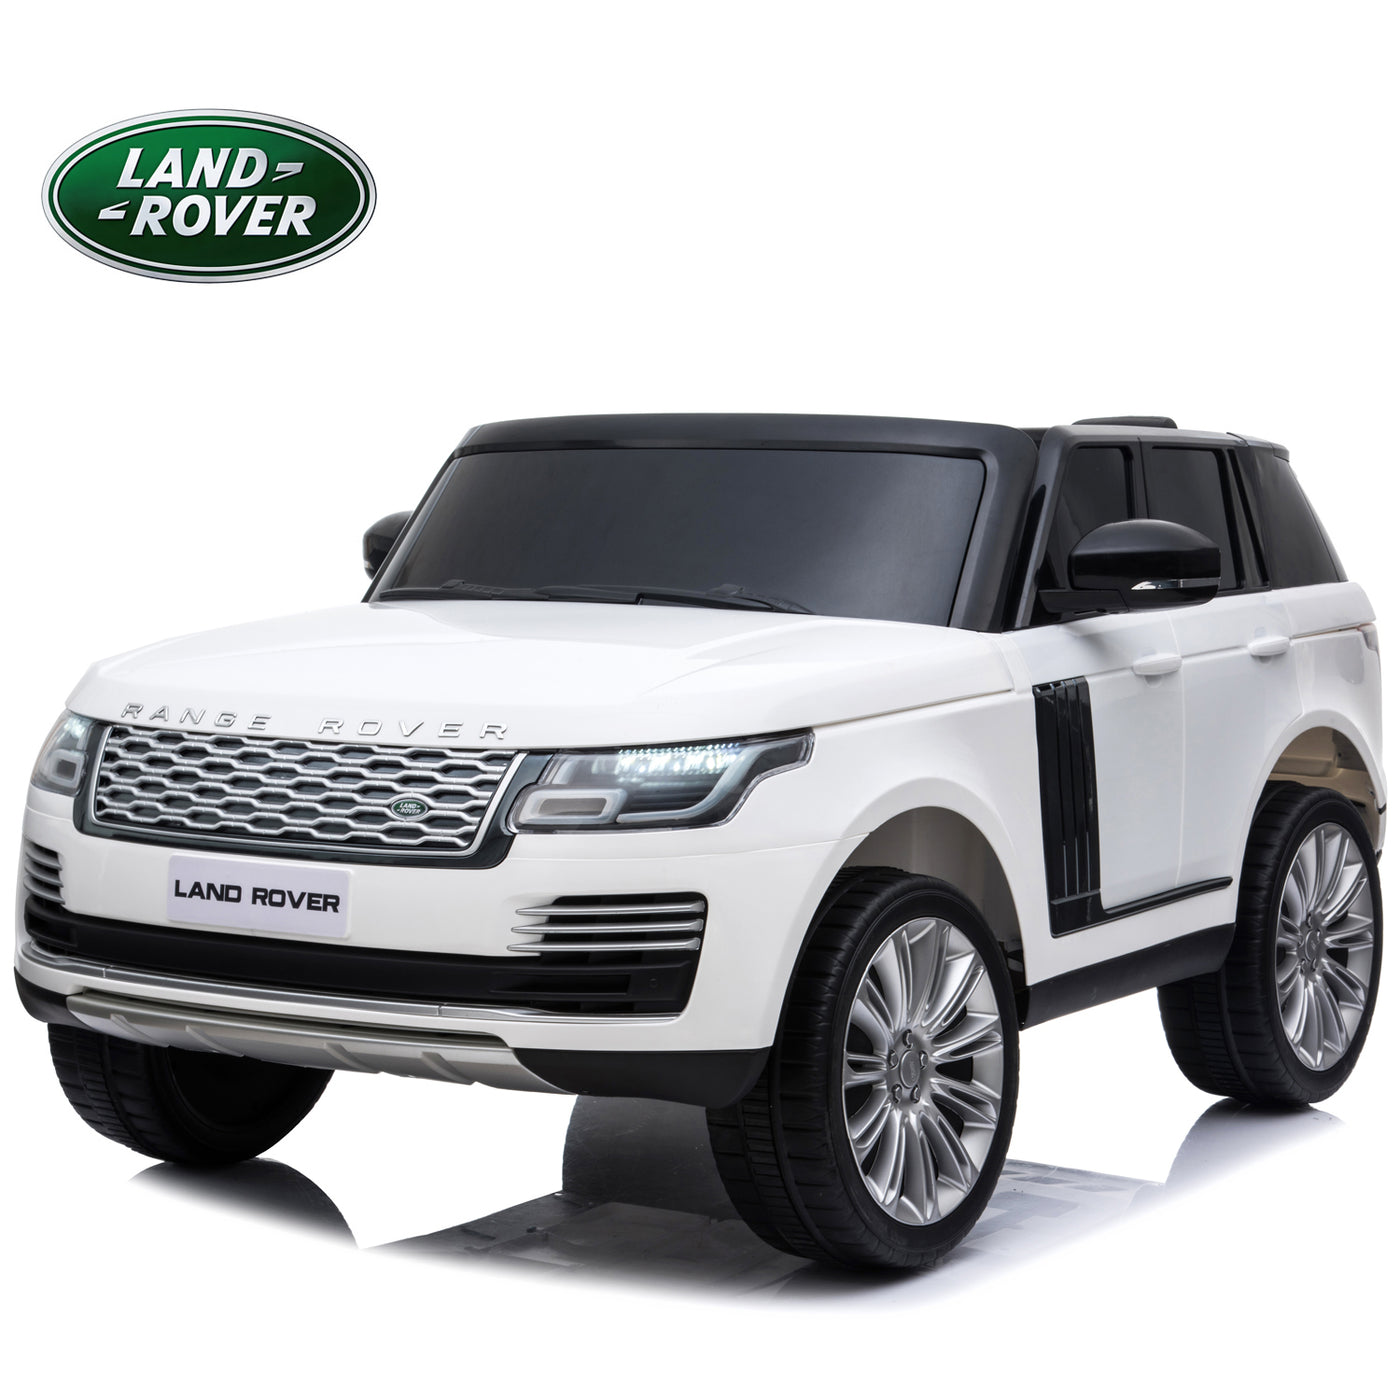 Licensed Land Rover Ride On Car with Remote Control Bluetooth Music Electric Toy